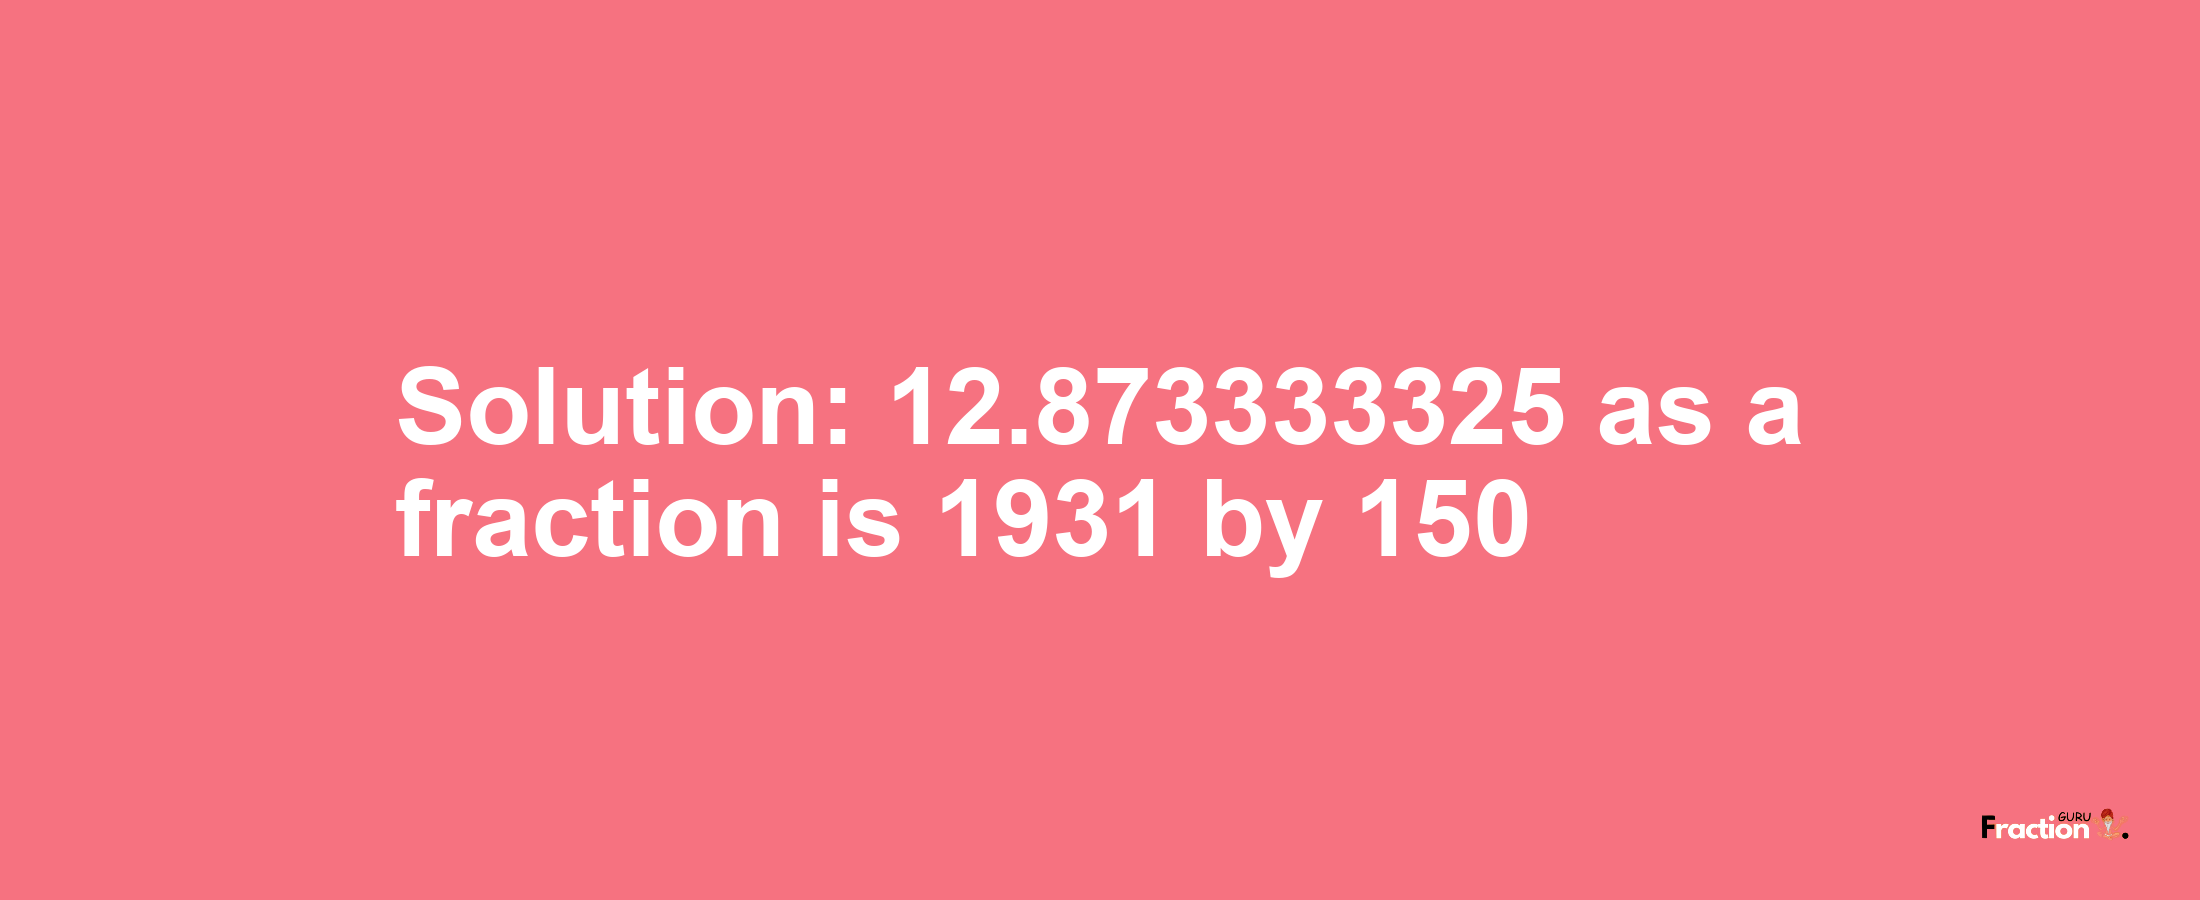 Solution:12.873333325 as a fraction is 1931/150